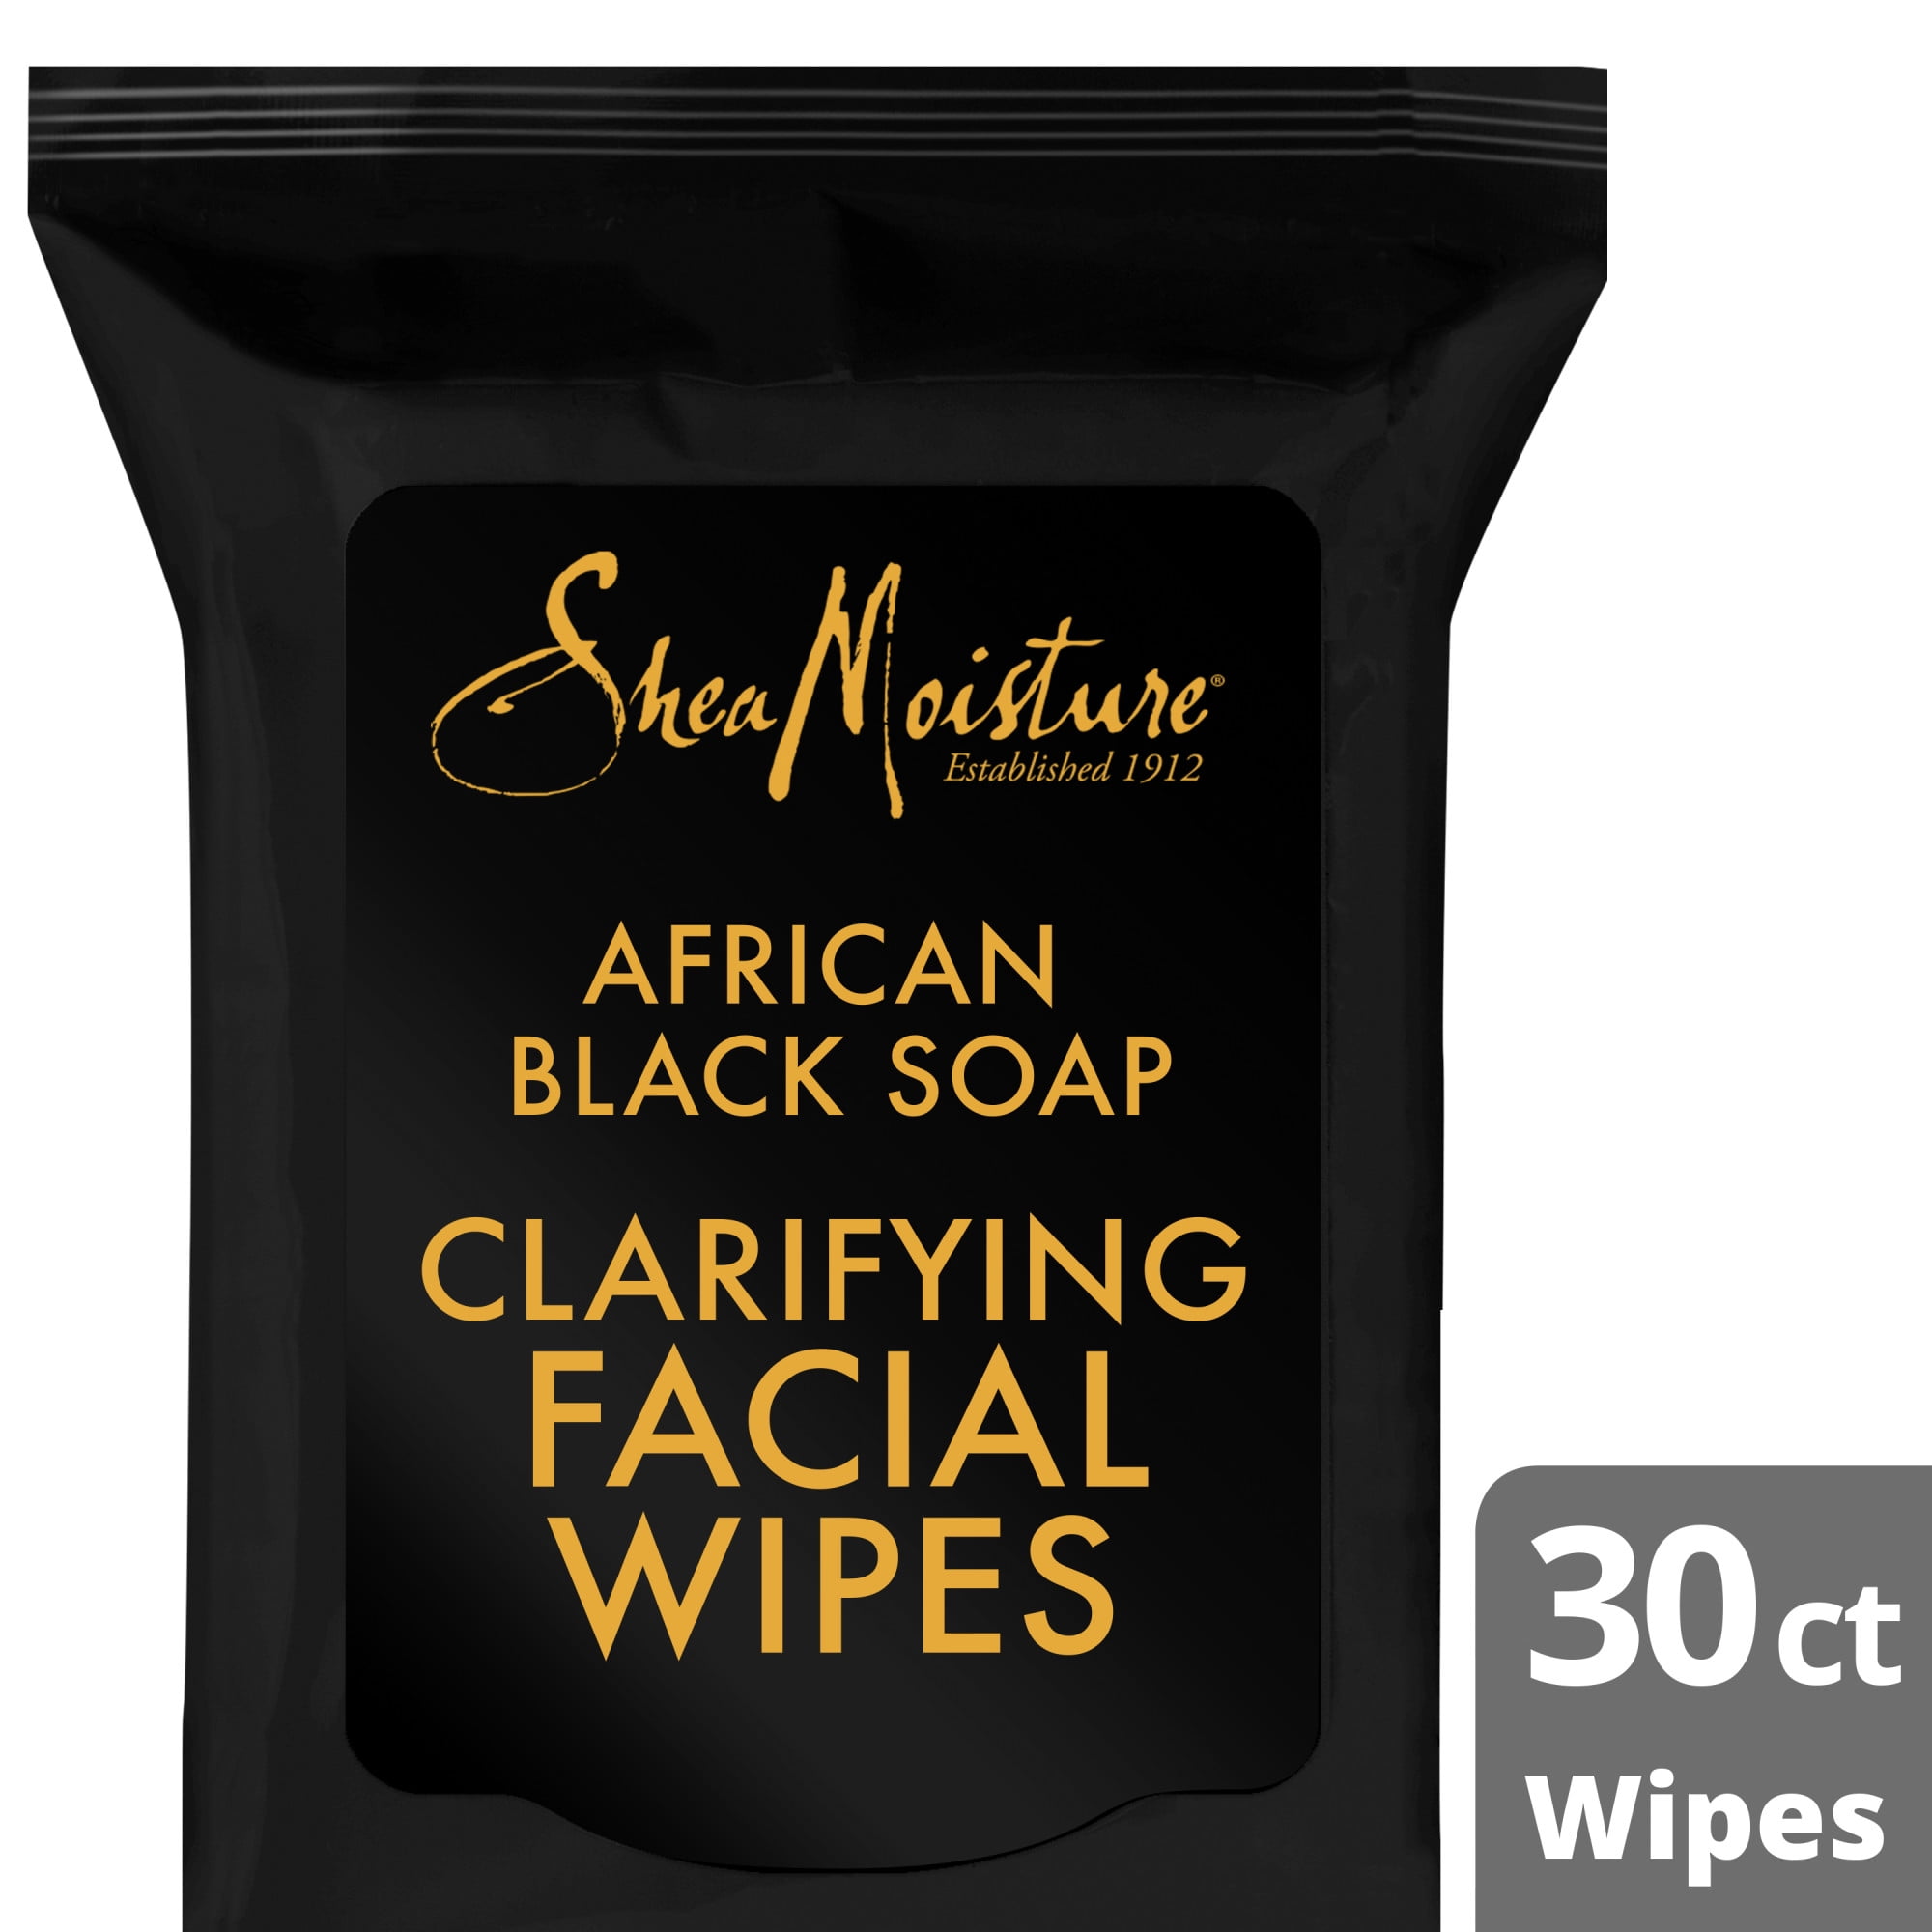 SheaMoisture African Black Soap Clarifying Facial Wipes for Oily, Blemish-Prone Skin, 30 Count